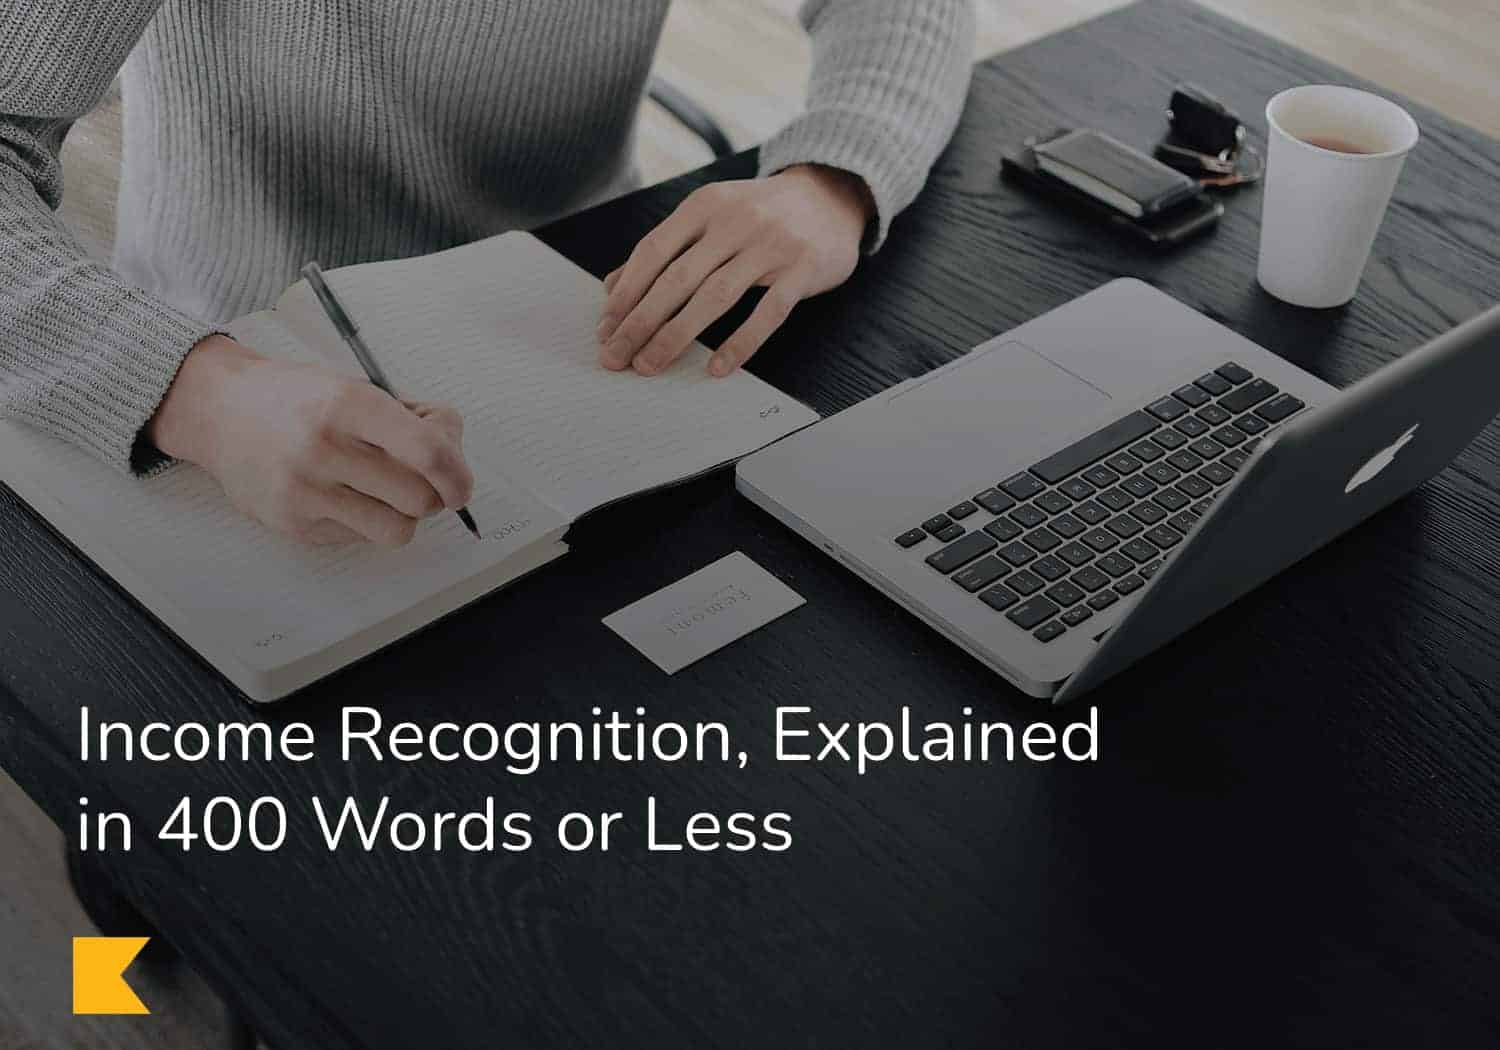 Revenue Recognition, Explained in 400 words or less